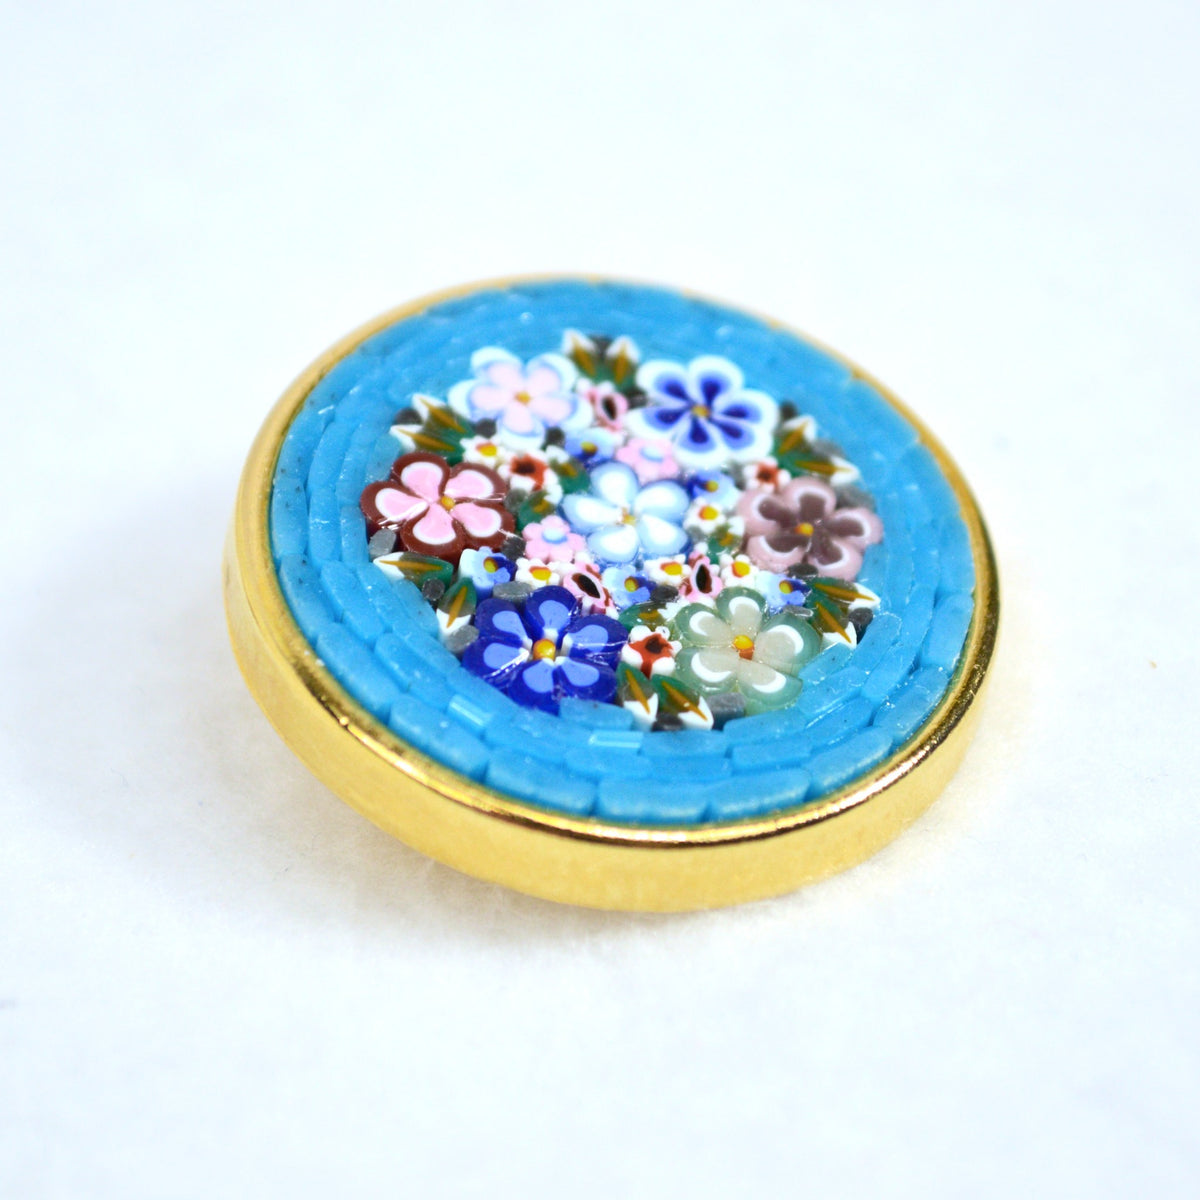 Florentine Mosaic Large Round Brooch, Lapel Pin, Made in Italy - My Italian Decor